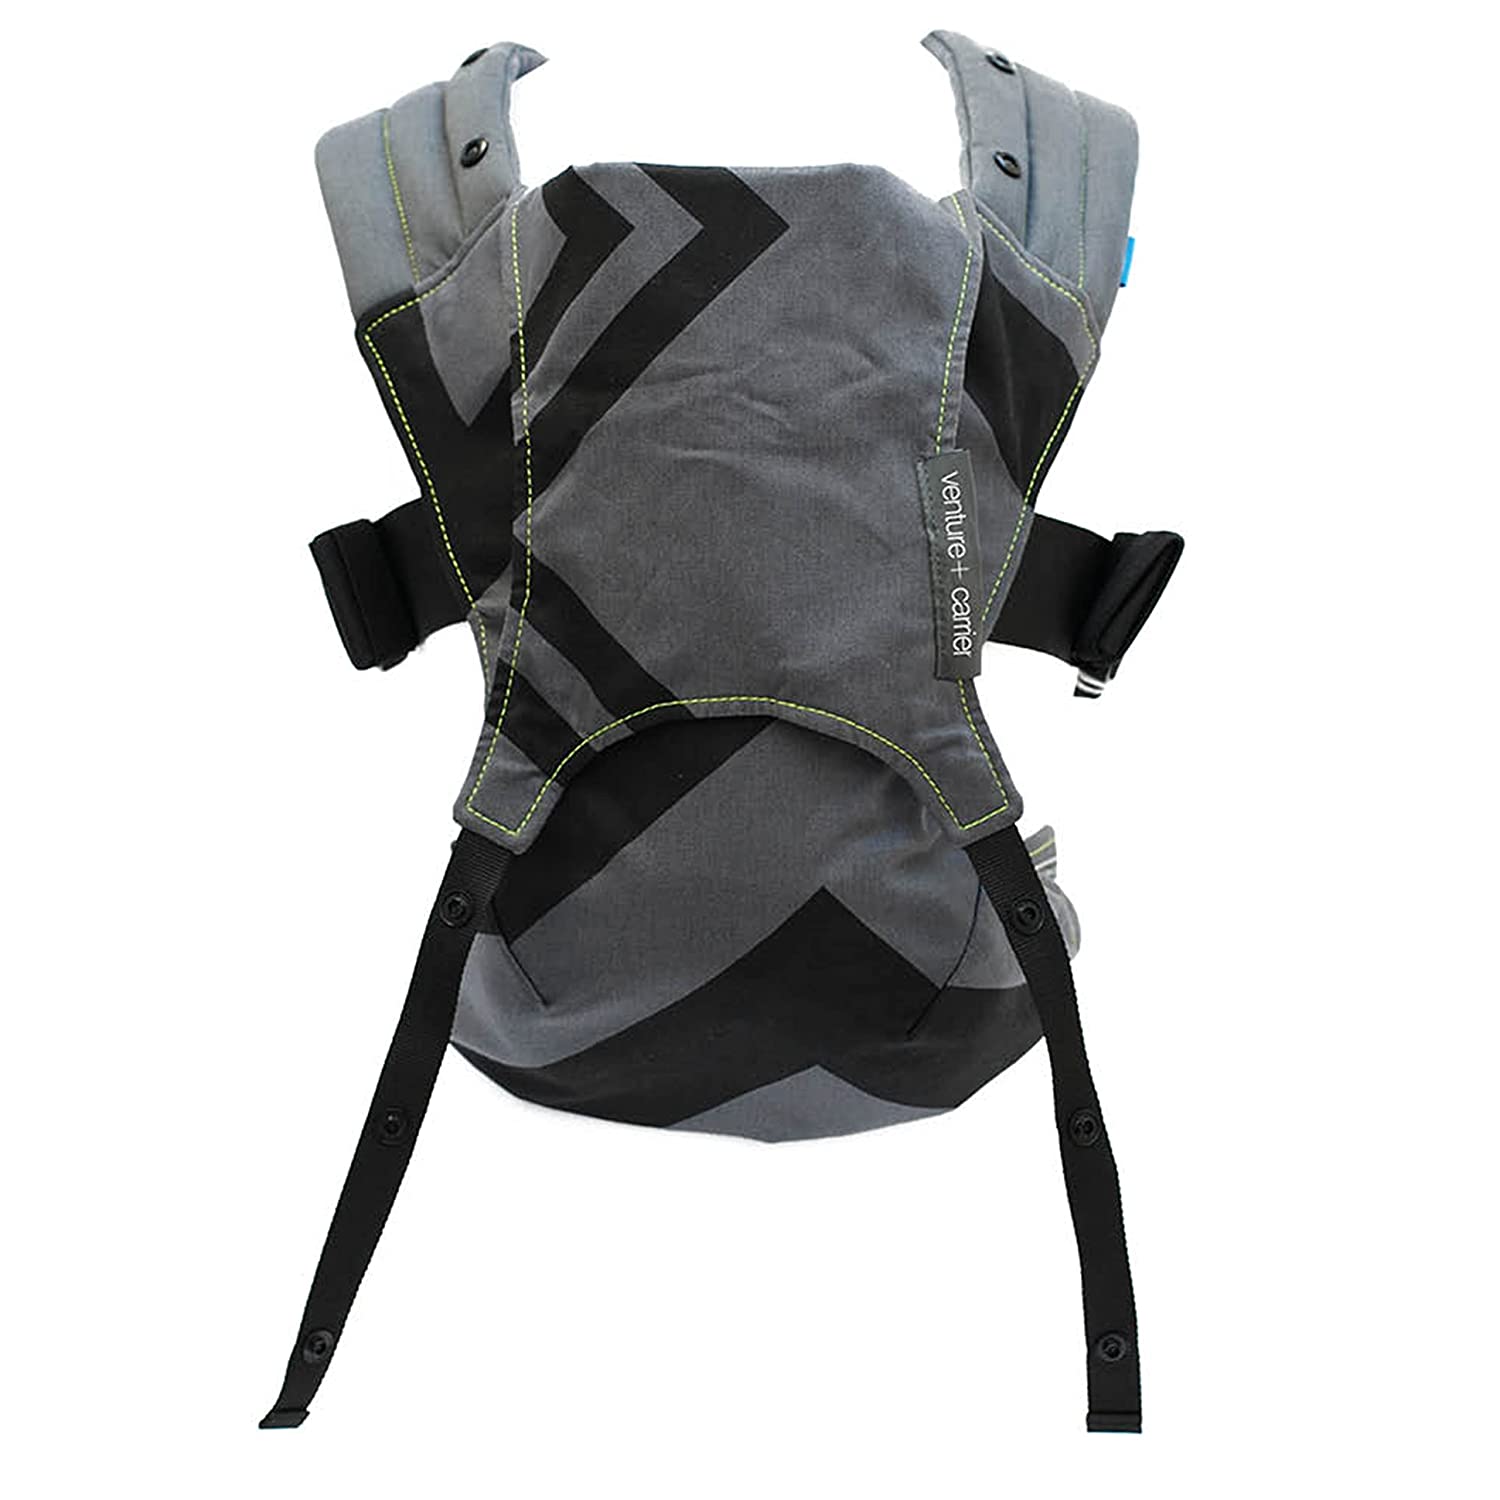 We Made Me Venture+ 2-in-1 Toddler Back and Tummy Harness 11-25kg (18-36m) Black Charcoal Zigzag